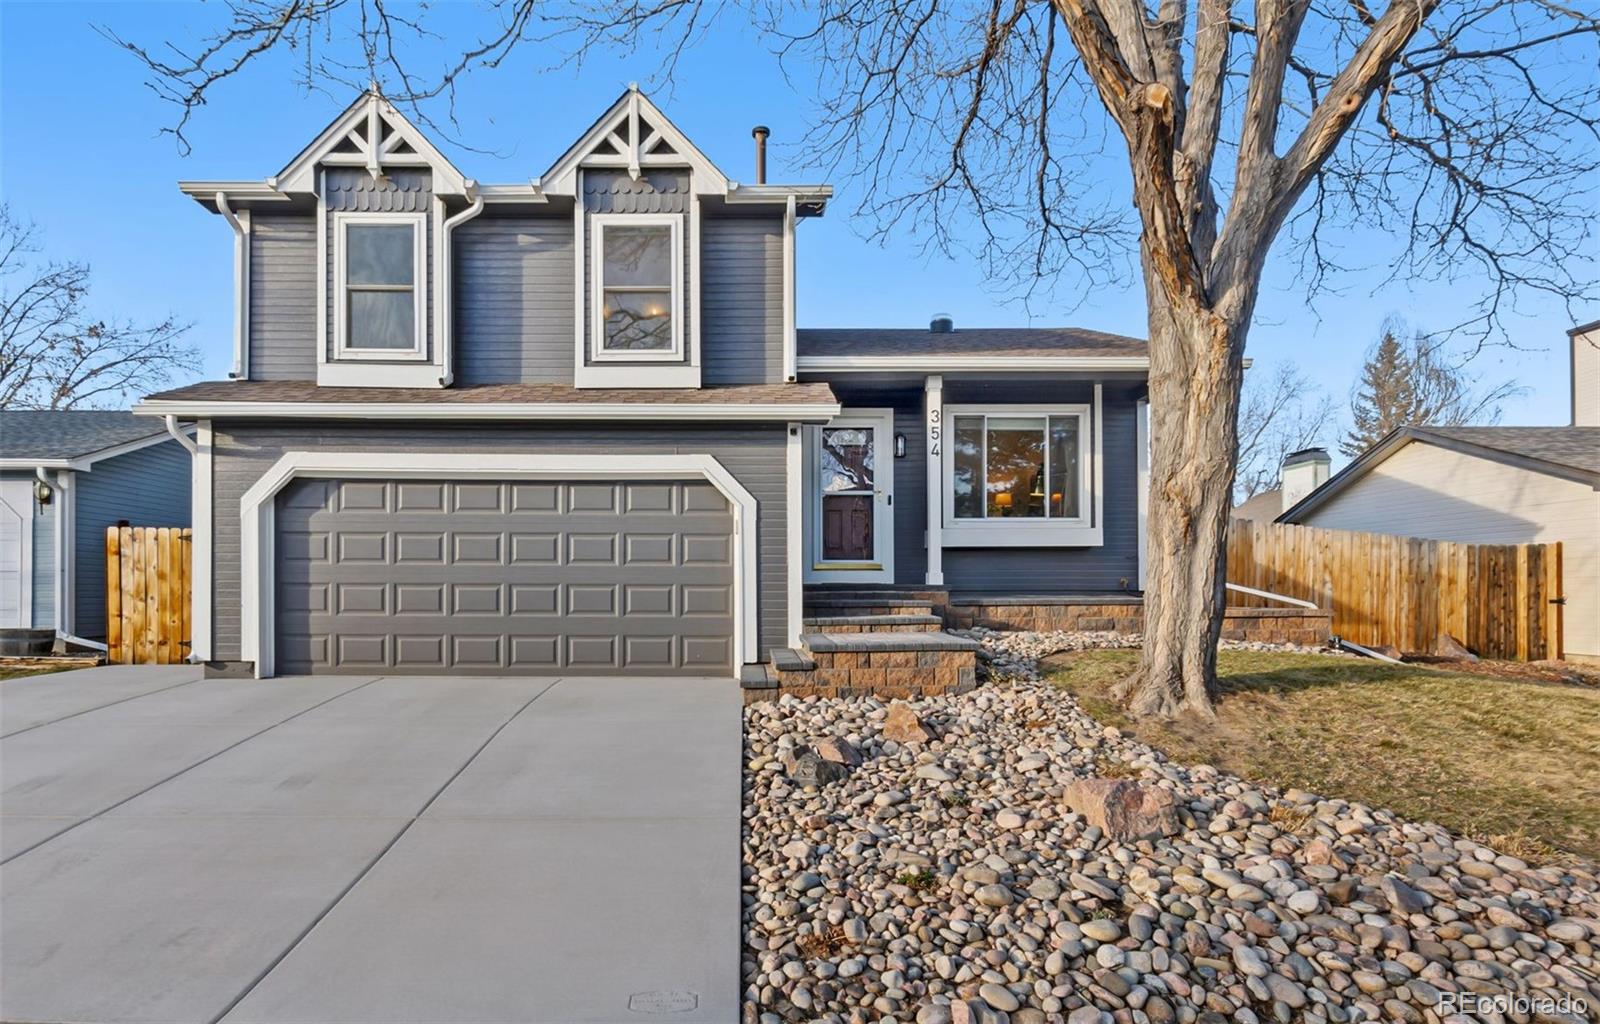 354  Mulberry Circle, broomfield MLS: 1957244 Beds: 3 Baths: 2 Price: $524,900